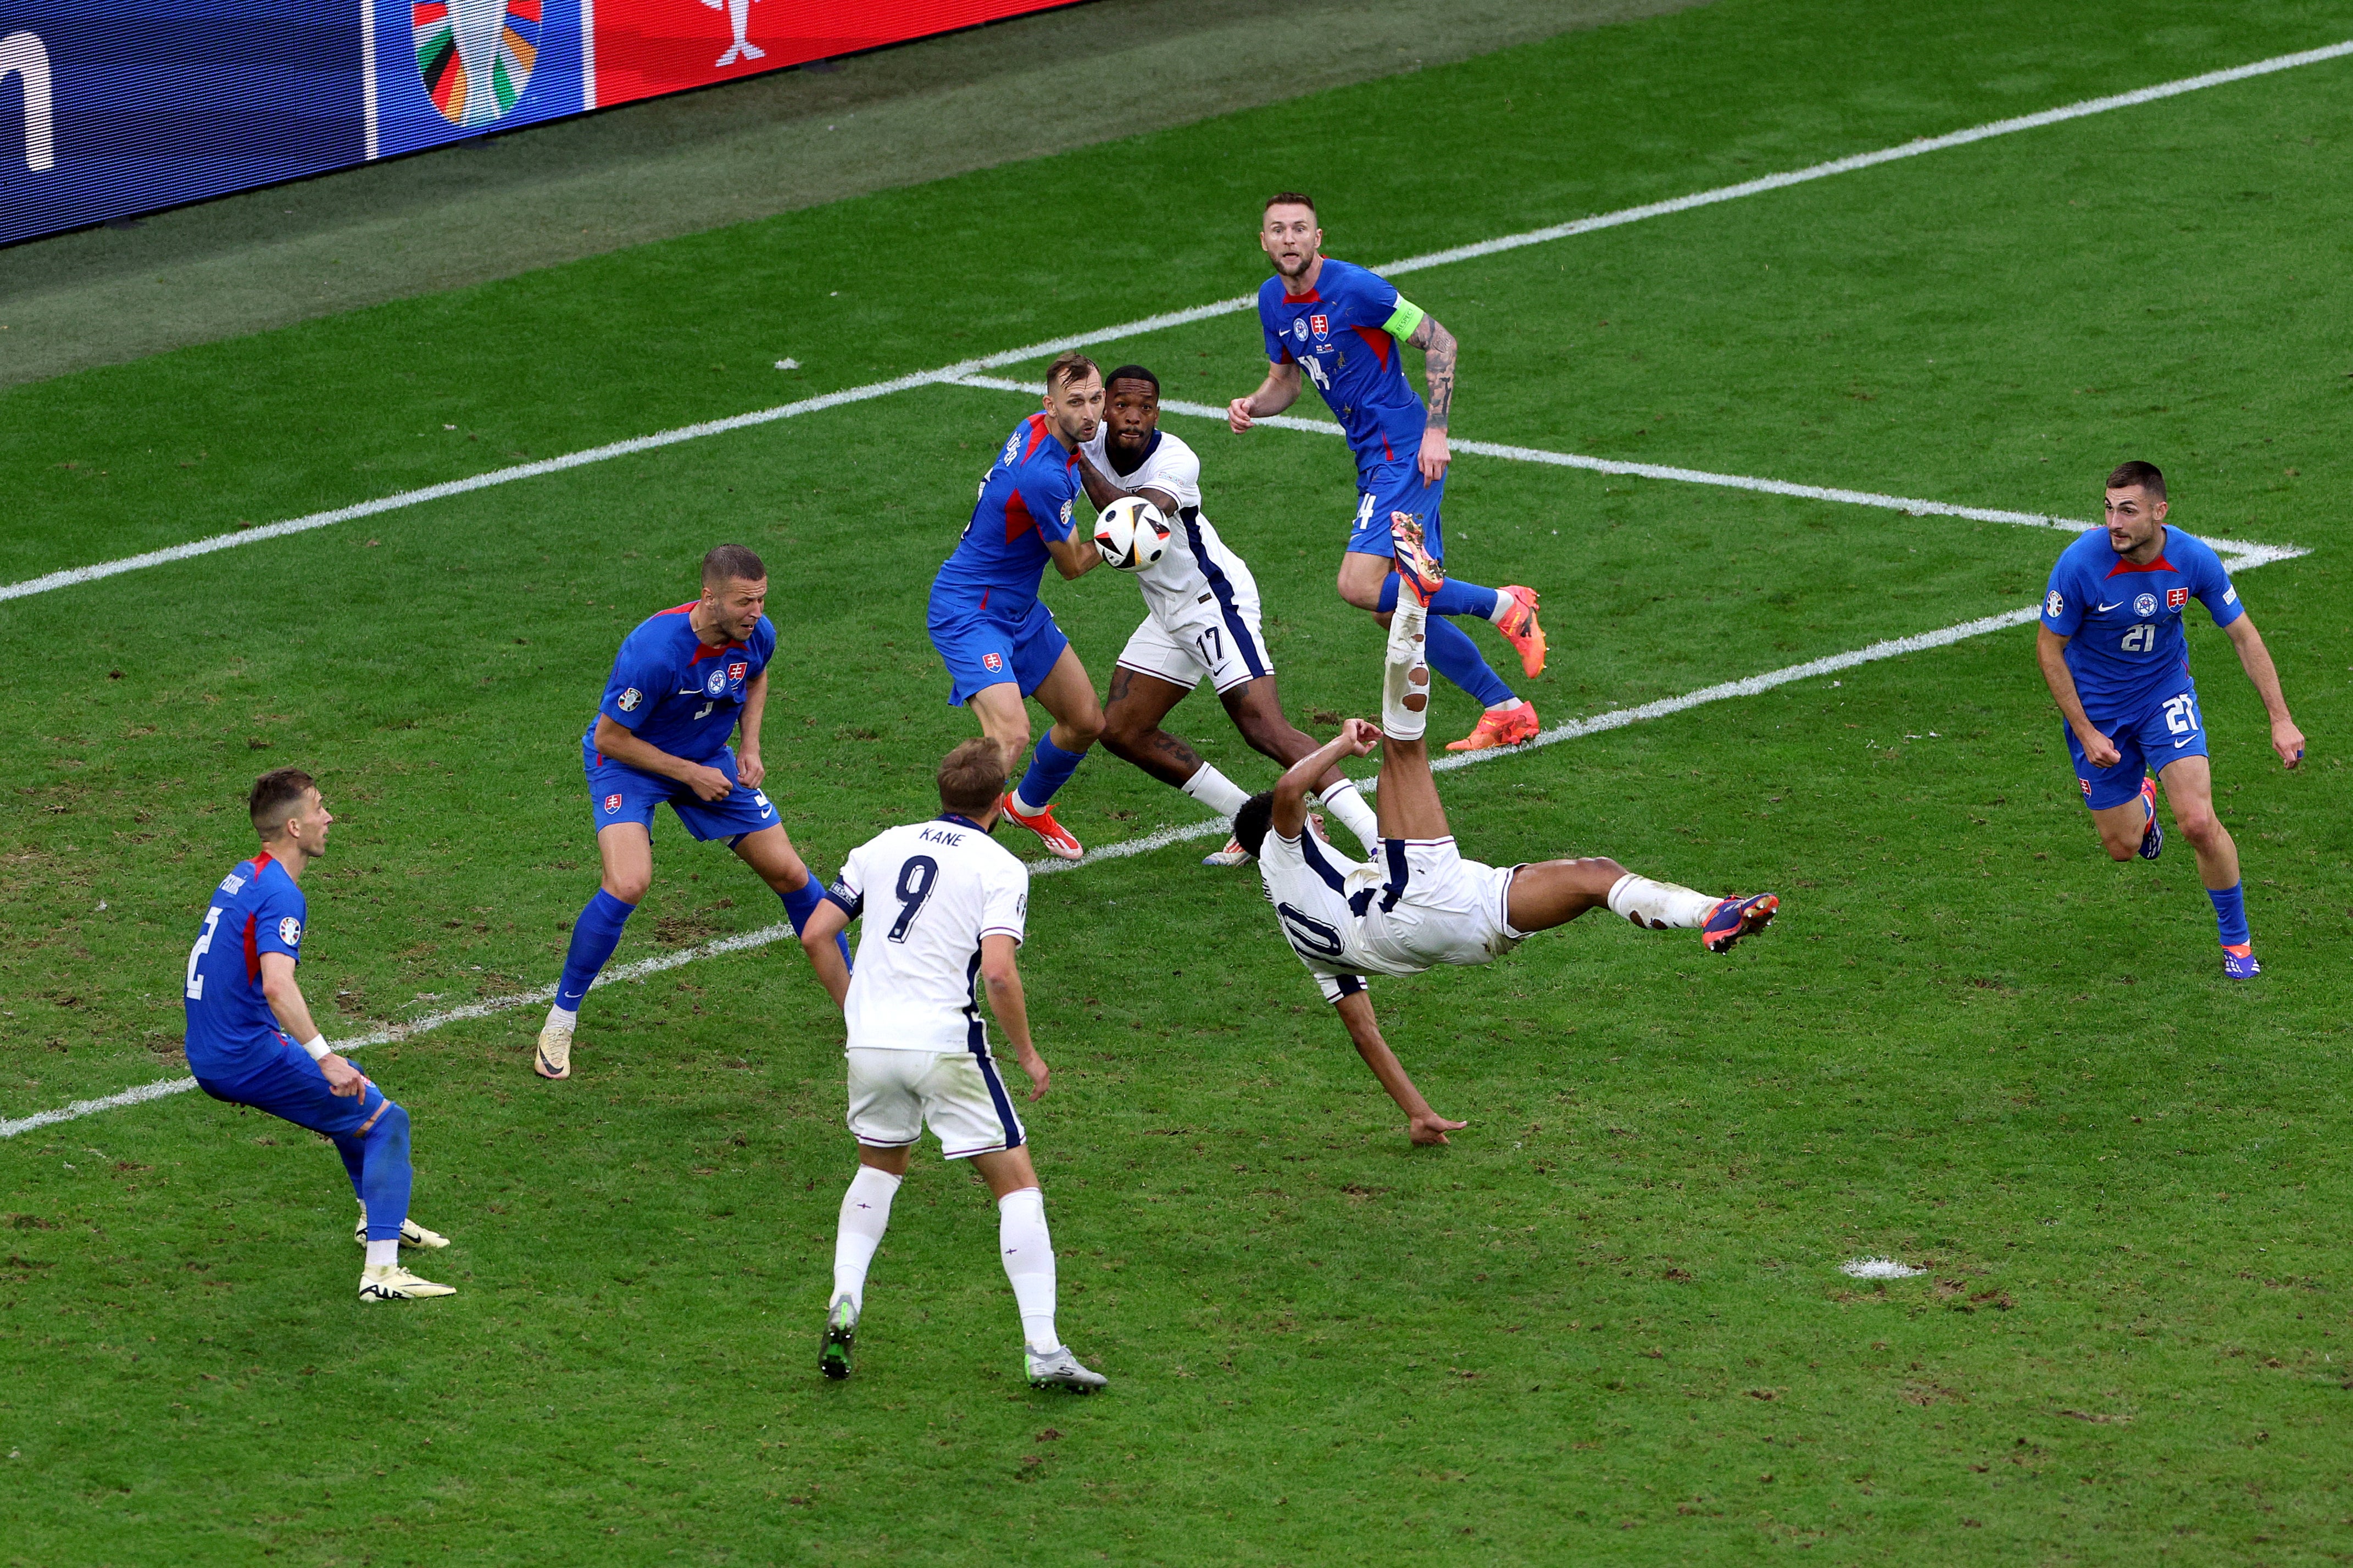 Jude Bellingham scored a vital overhead kick in the 96th minute to rescue England